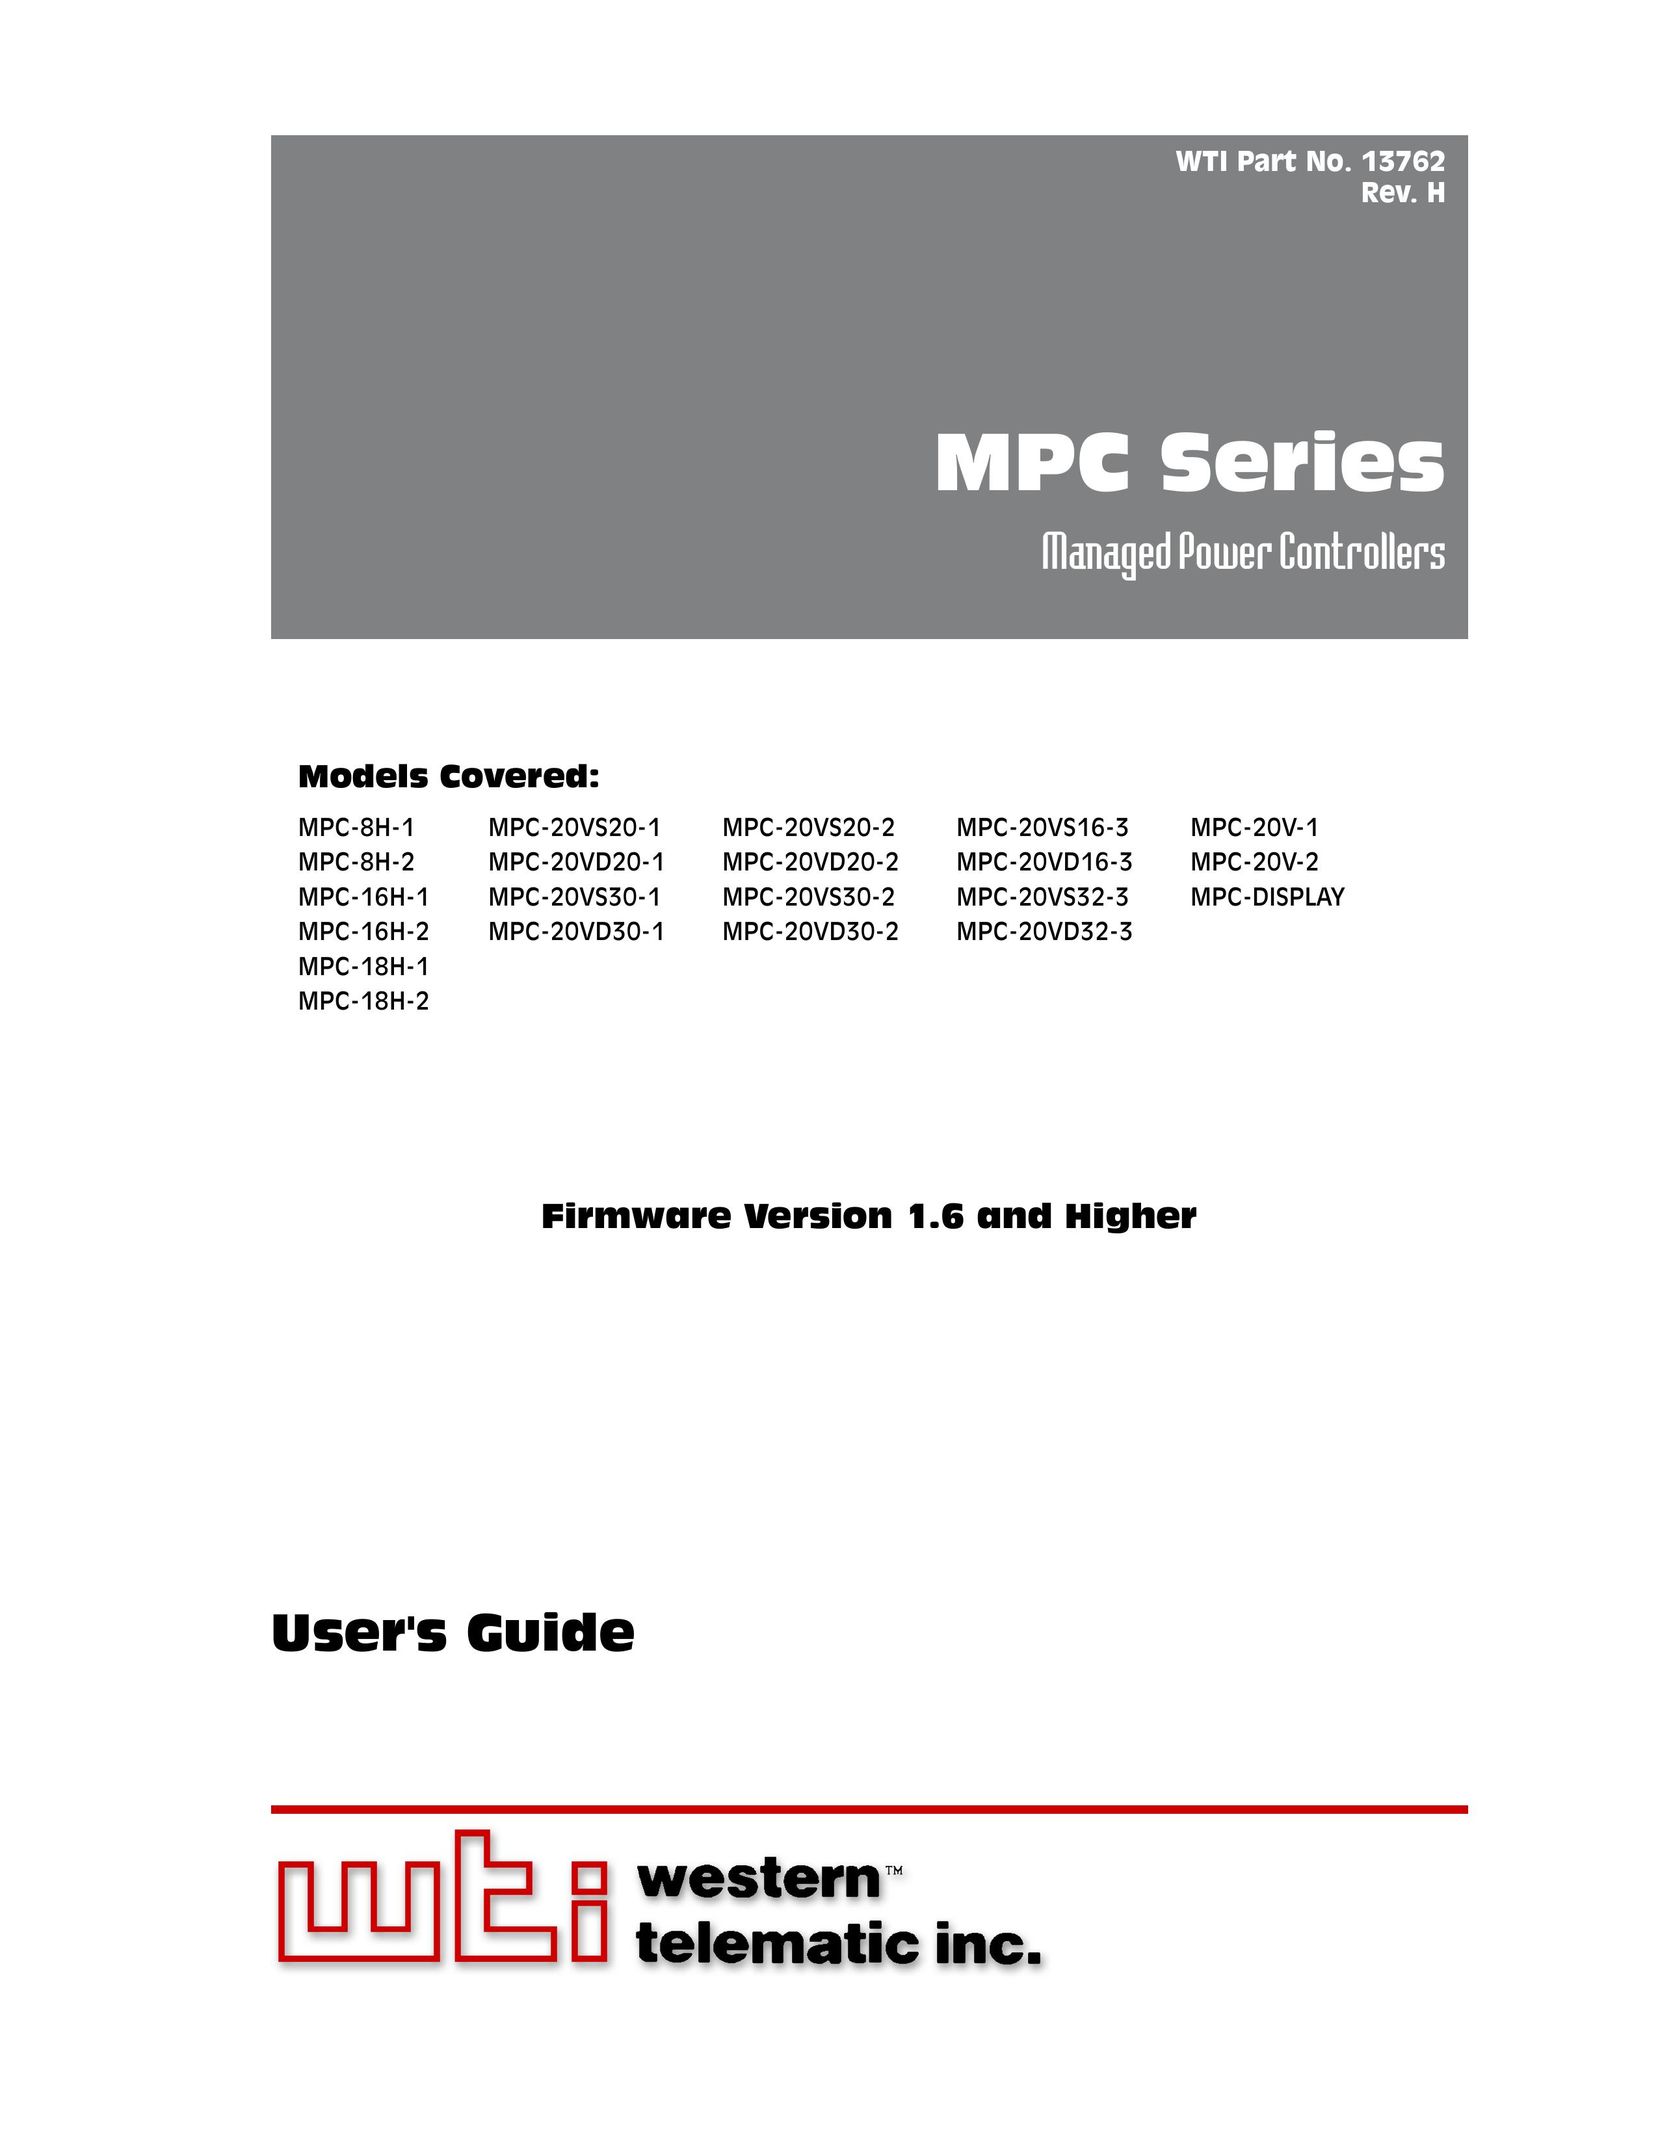 Western Telematic MPC-20VD16-3 Network Card User Manual (Page 1)